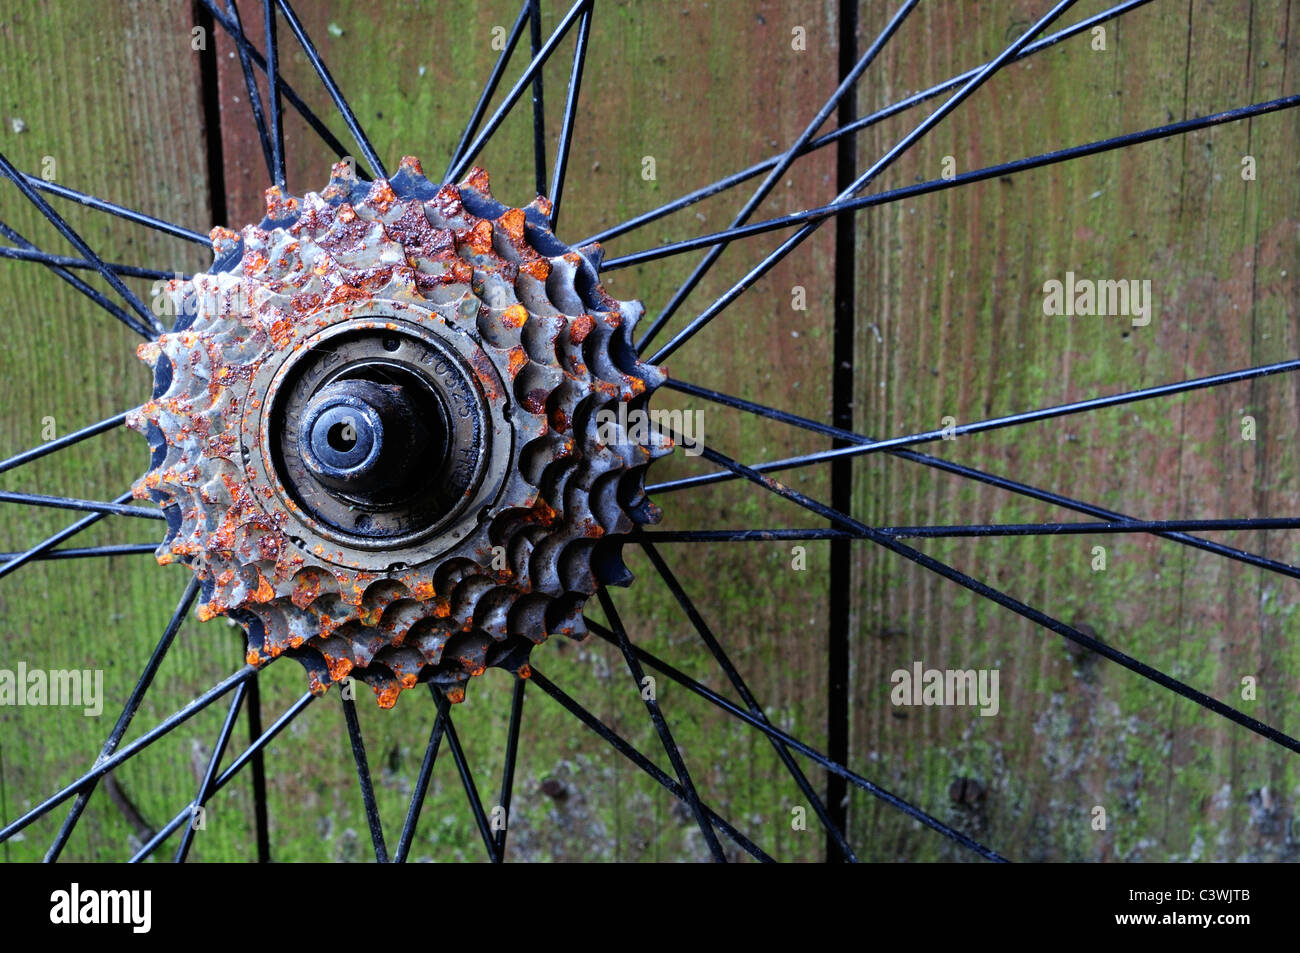 A rusting set of gears on a bicycle wheel. Stock Photo